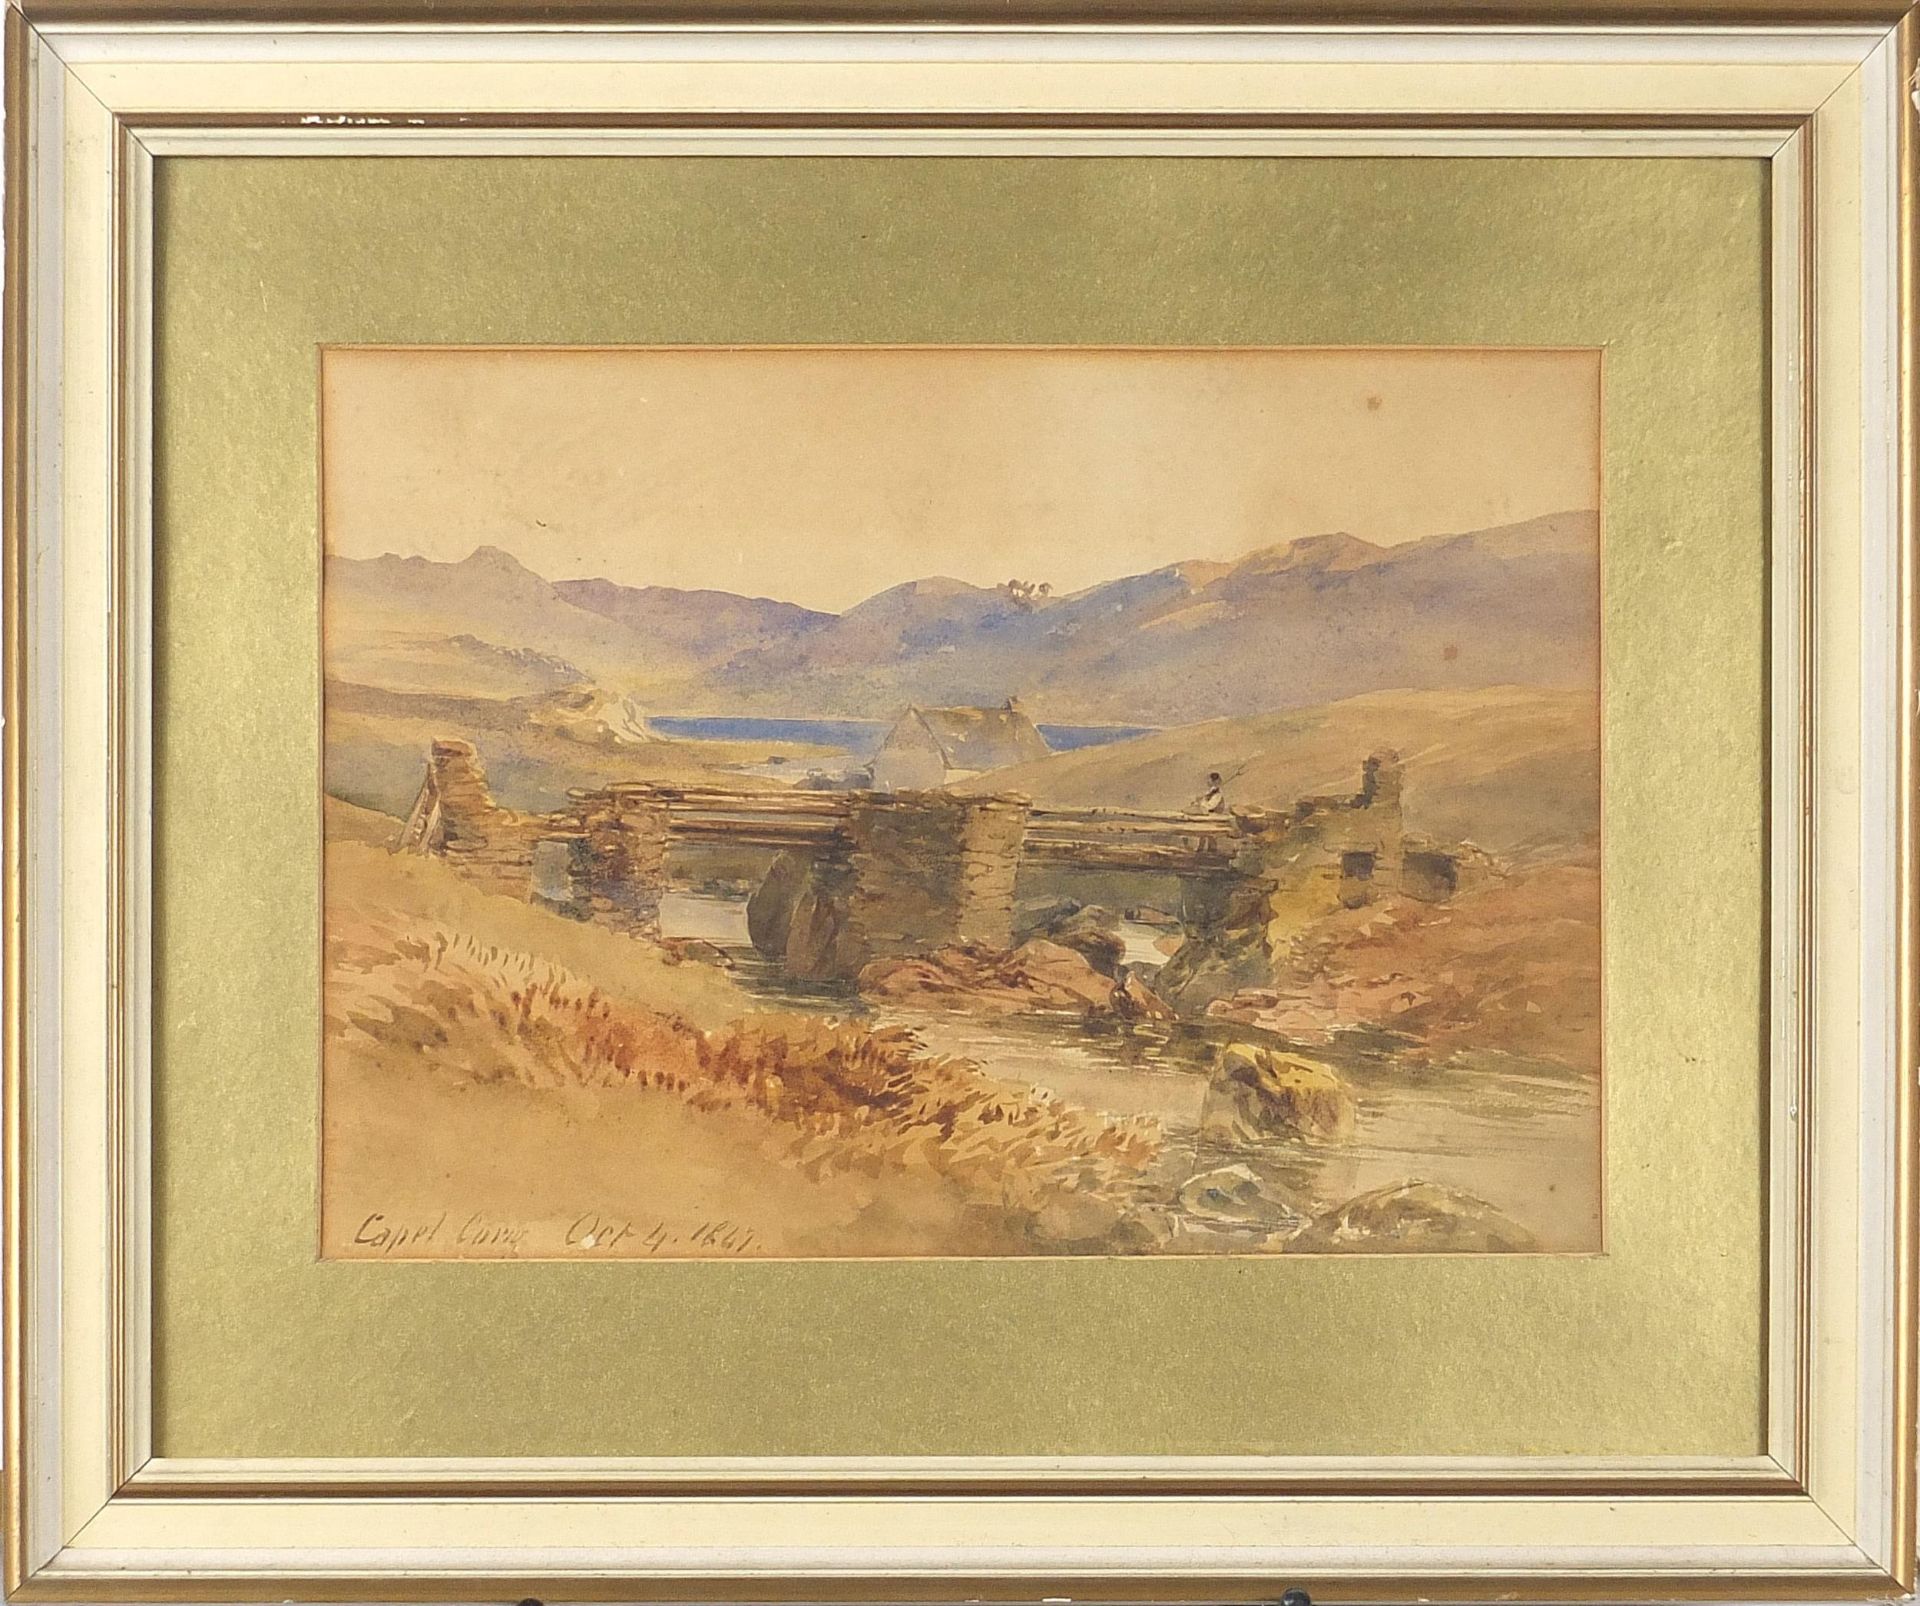 Capel Curig, 19th century Welsh watercolour, mounted, framed and glazed, 31.5cm x 21.5cm excluding - Image 2 of 4